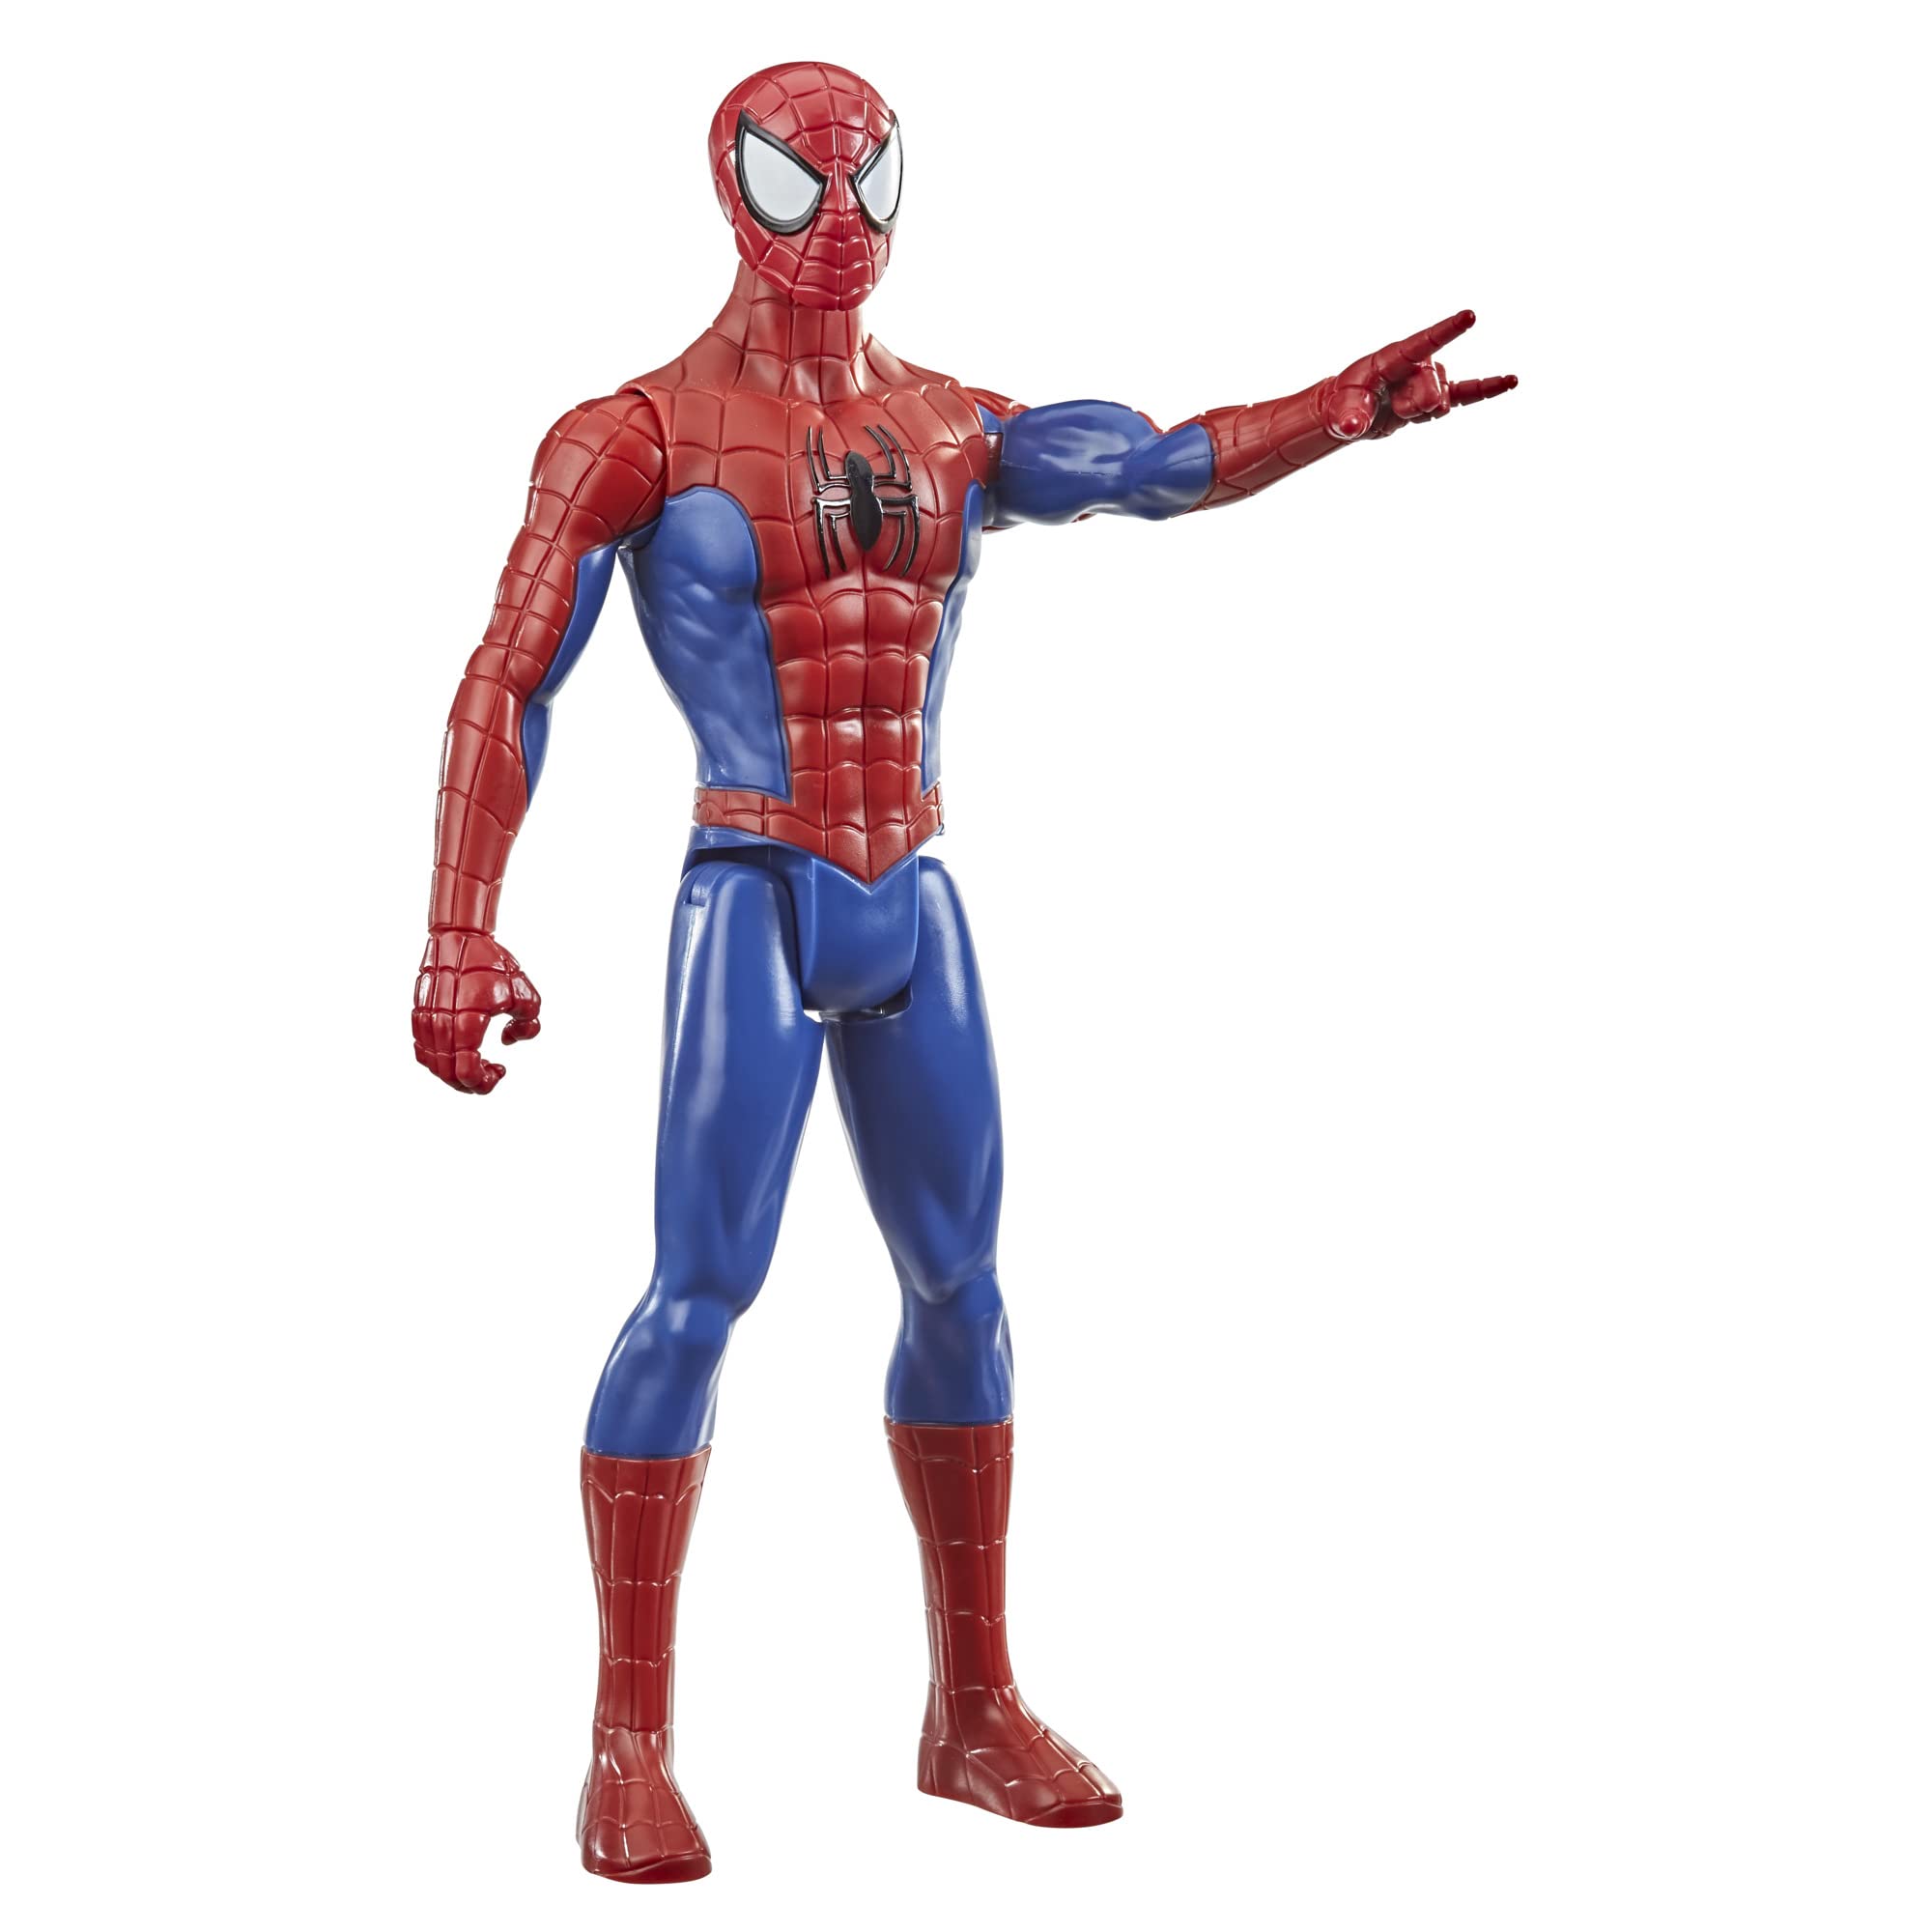 12" Marvel Spider-Man Titan Hero Series Action Figure $5.45 + Free Shipping w/ Prime or on orders over $35